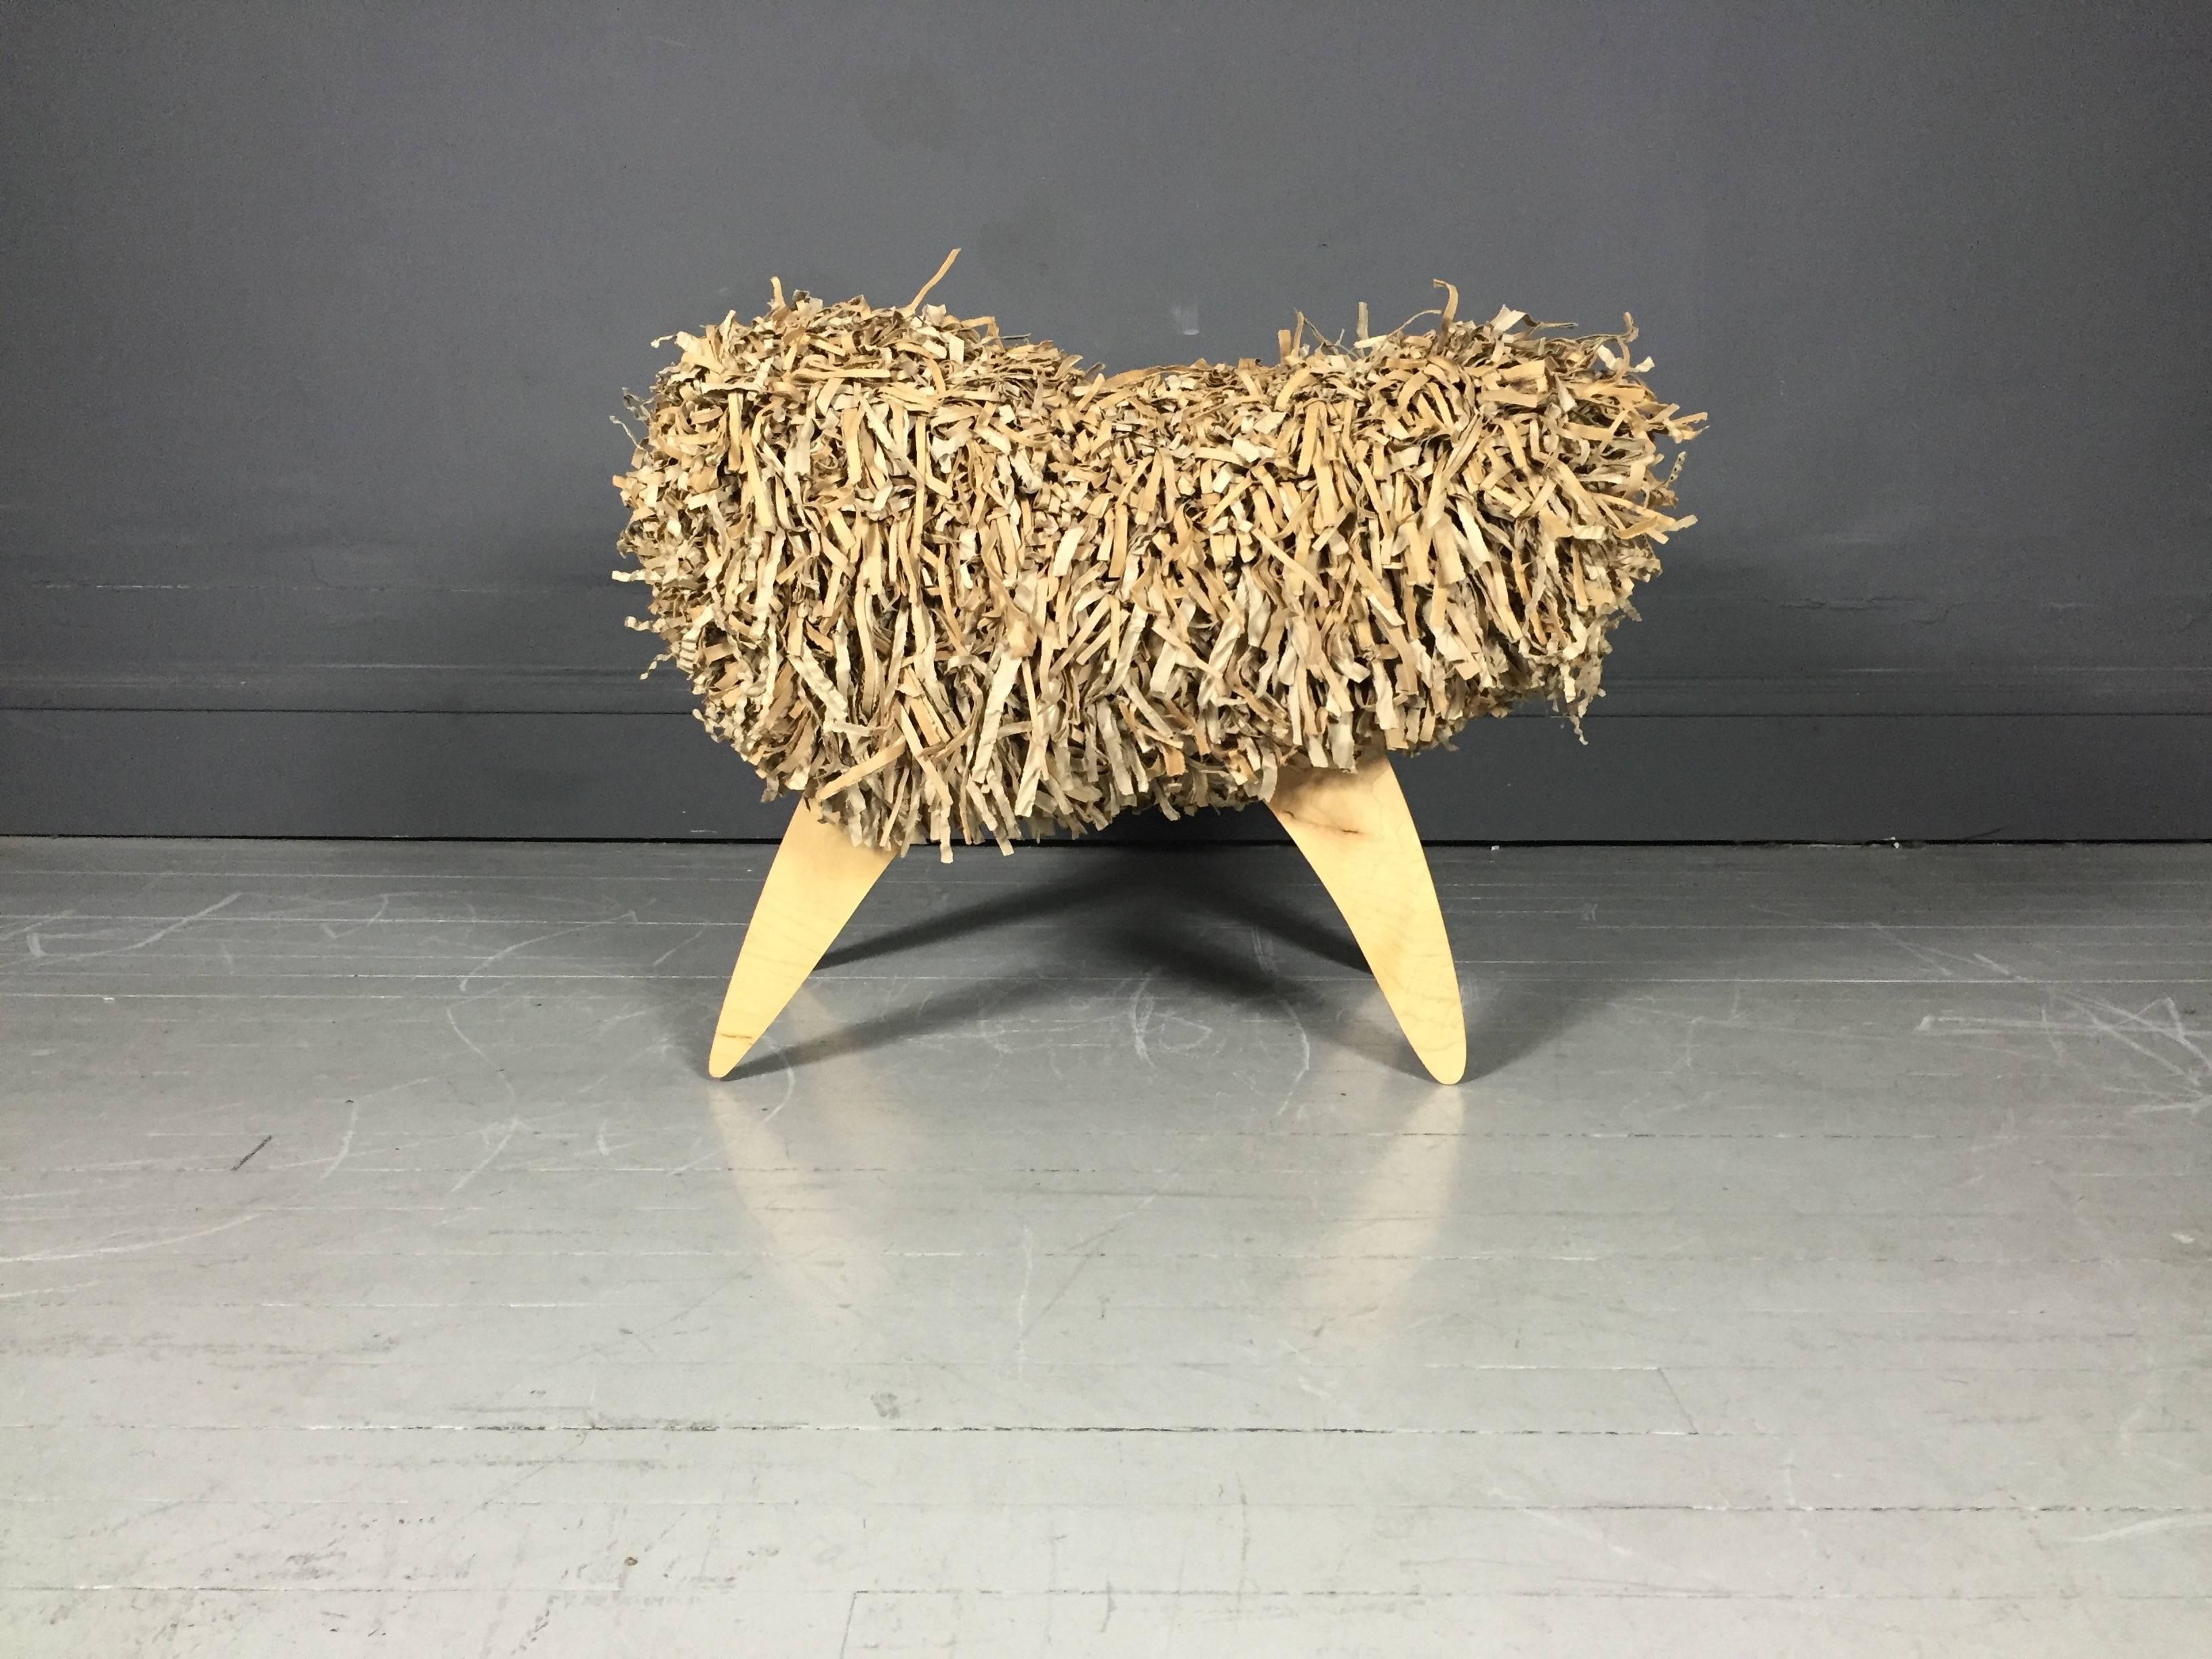 Paper Joel Stearns Prototype Bench, Shredded Cardboard and Wood, USA